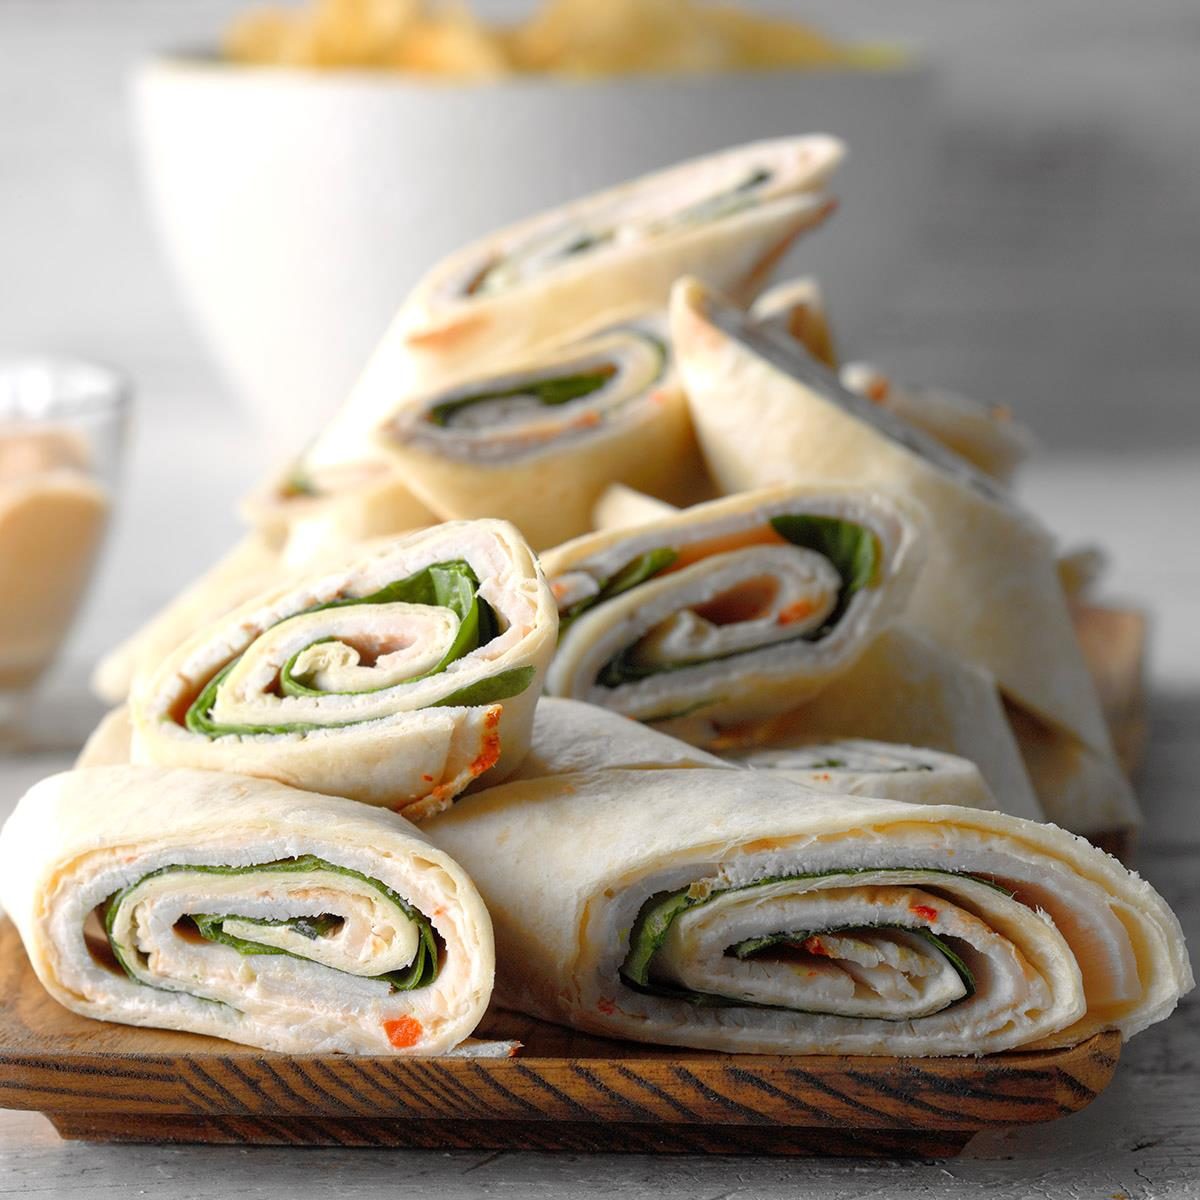 Spinach and Turkey Pinwheels Recipe: How to Make It